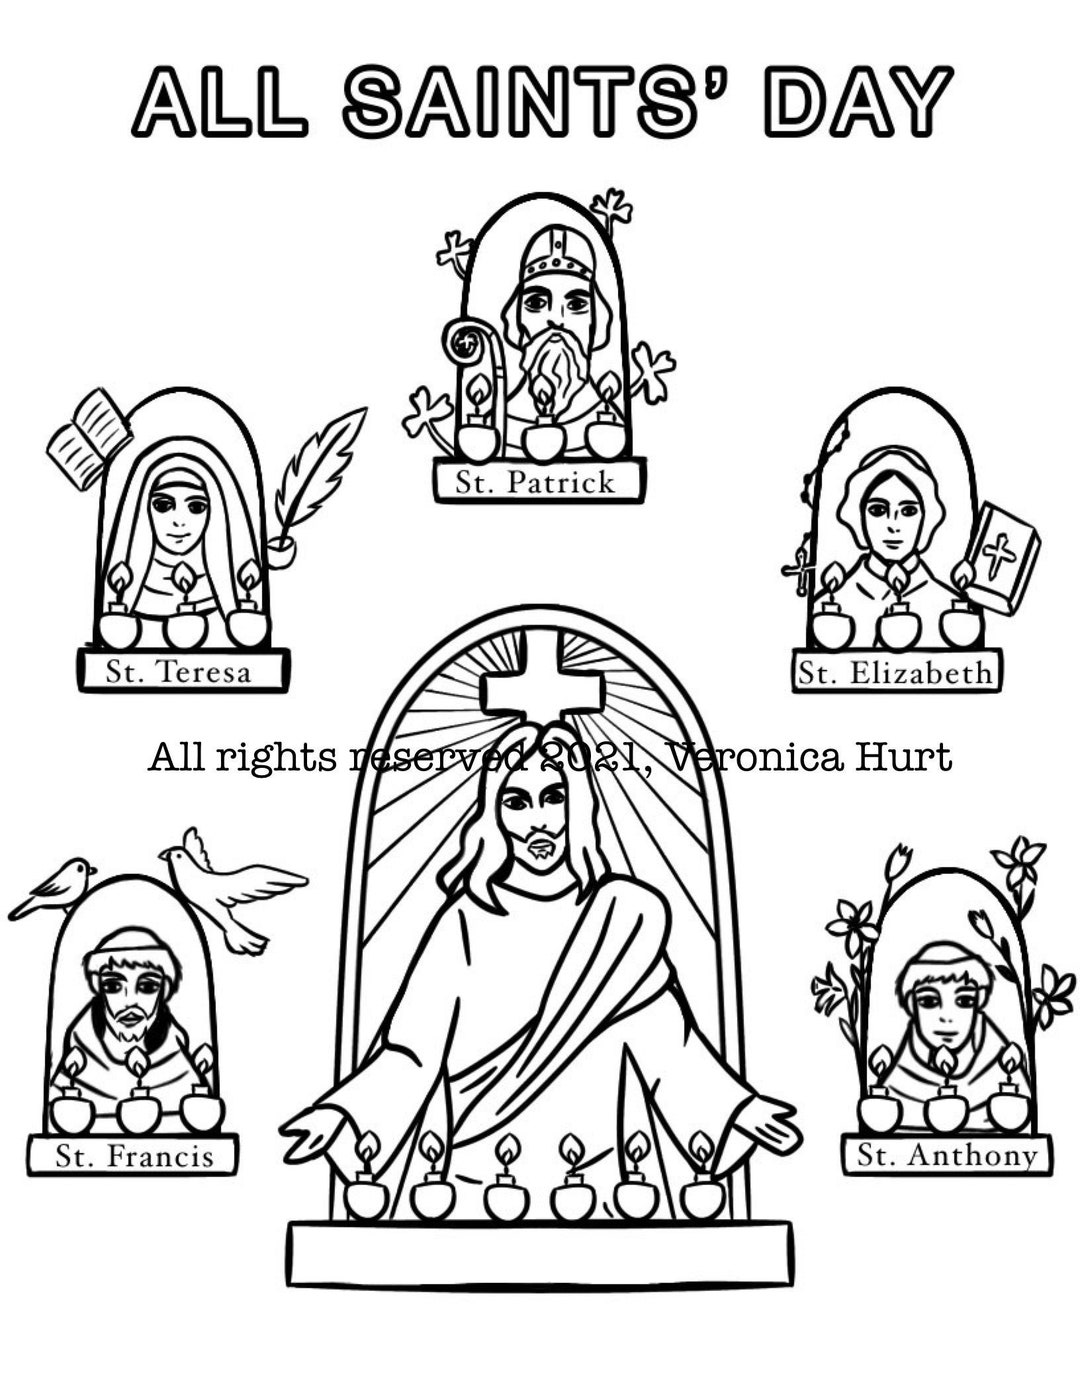 Catholic all saints day coloring poster page for kids and adults